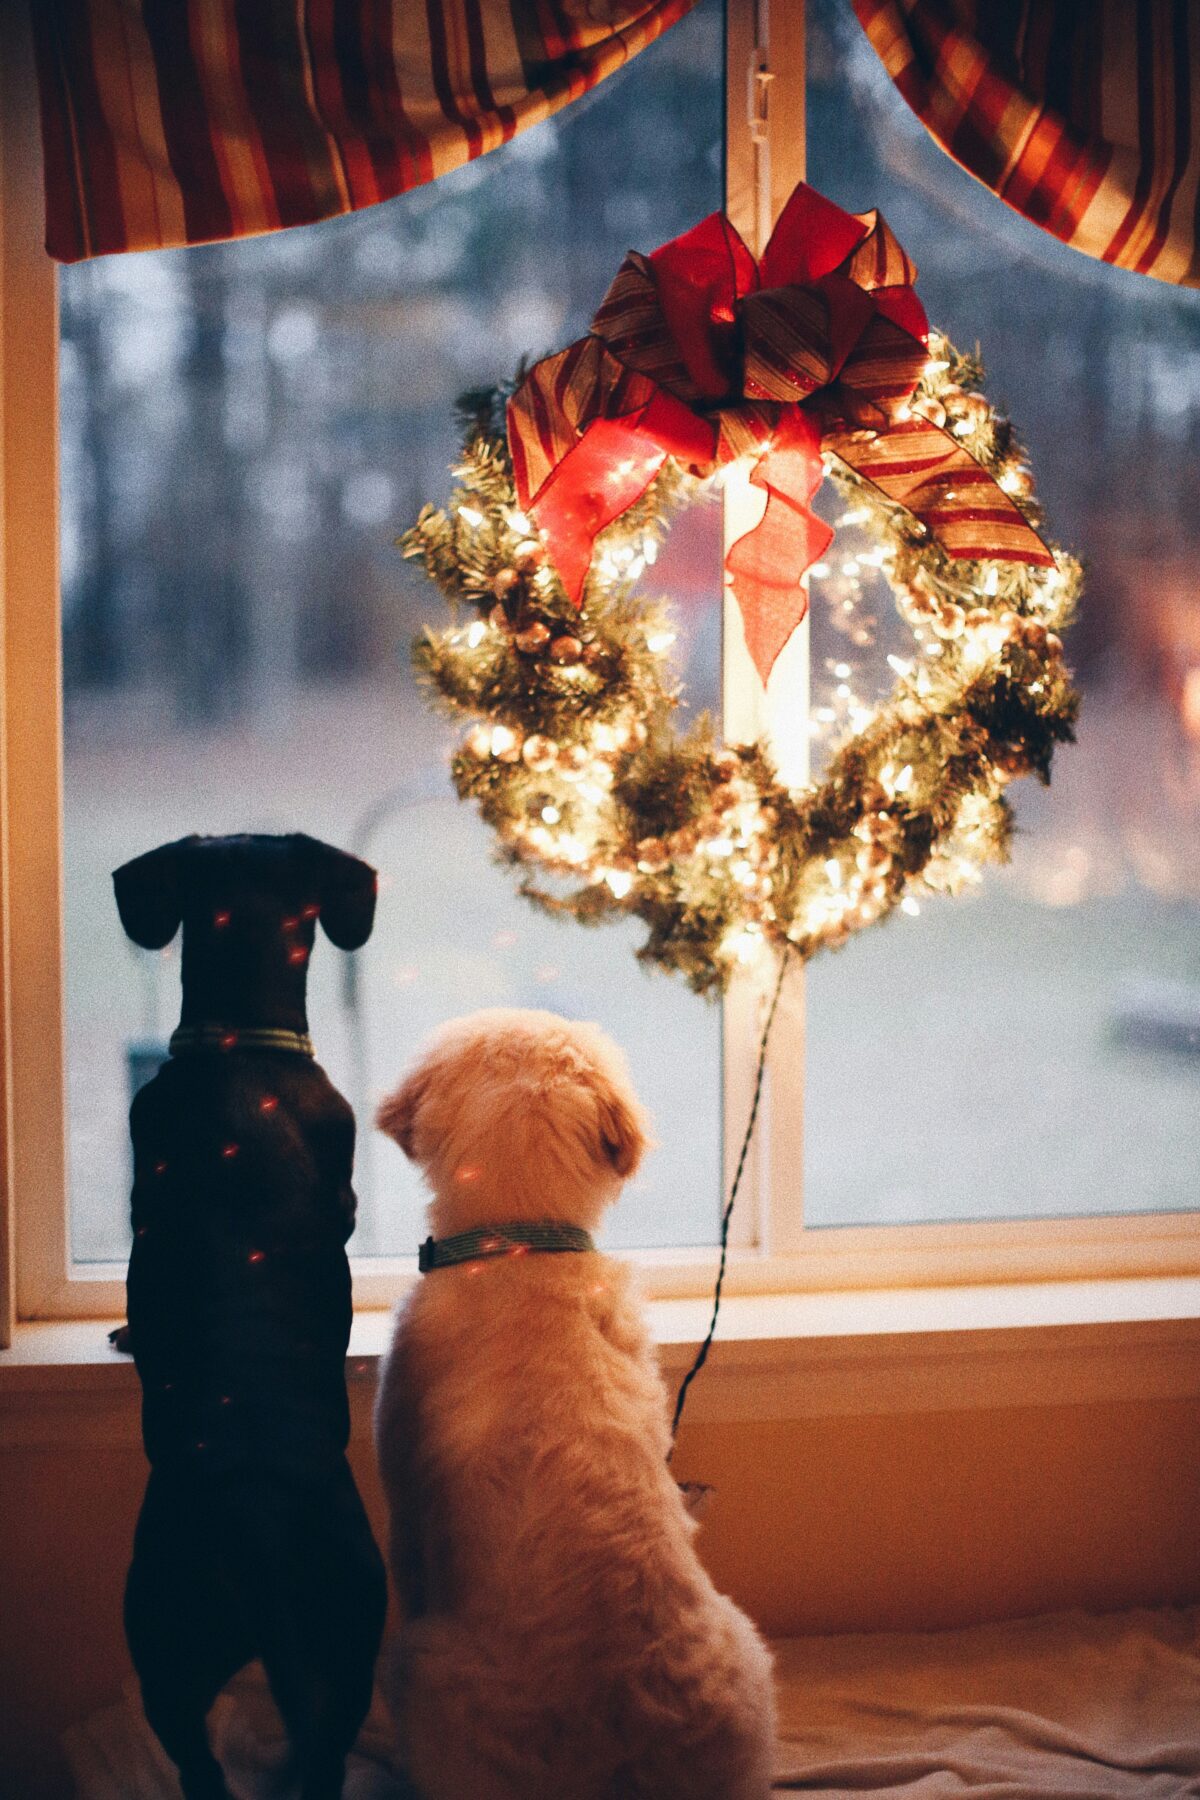 Two dogs peeking out window, lighted christmas wreath in window. Snowy evening